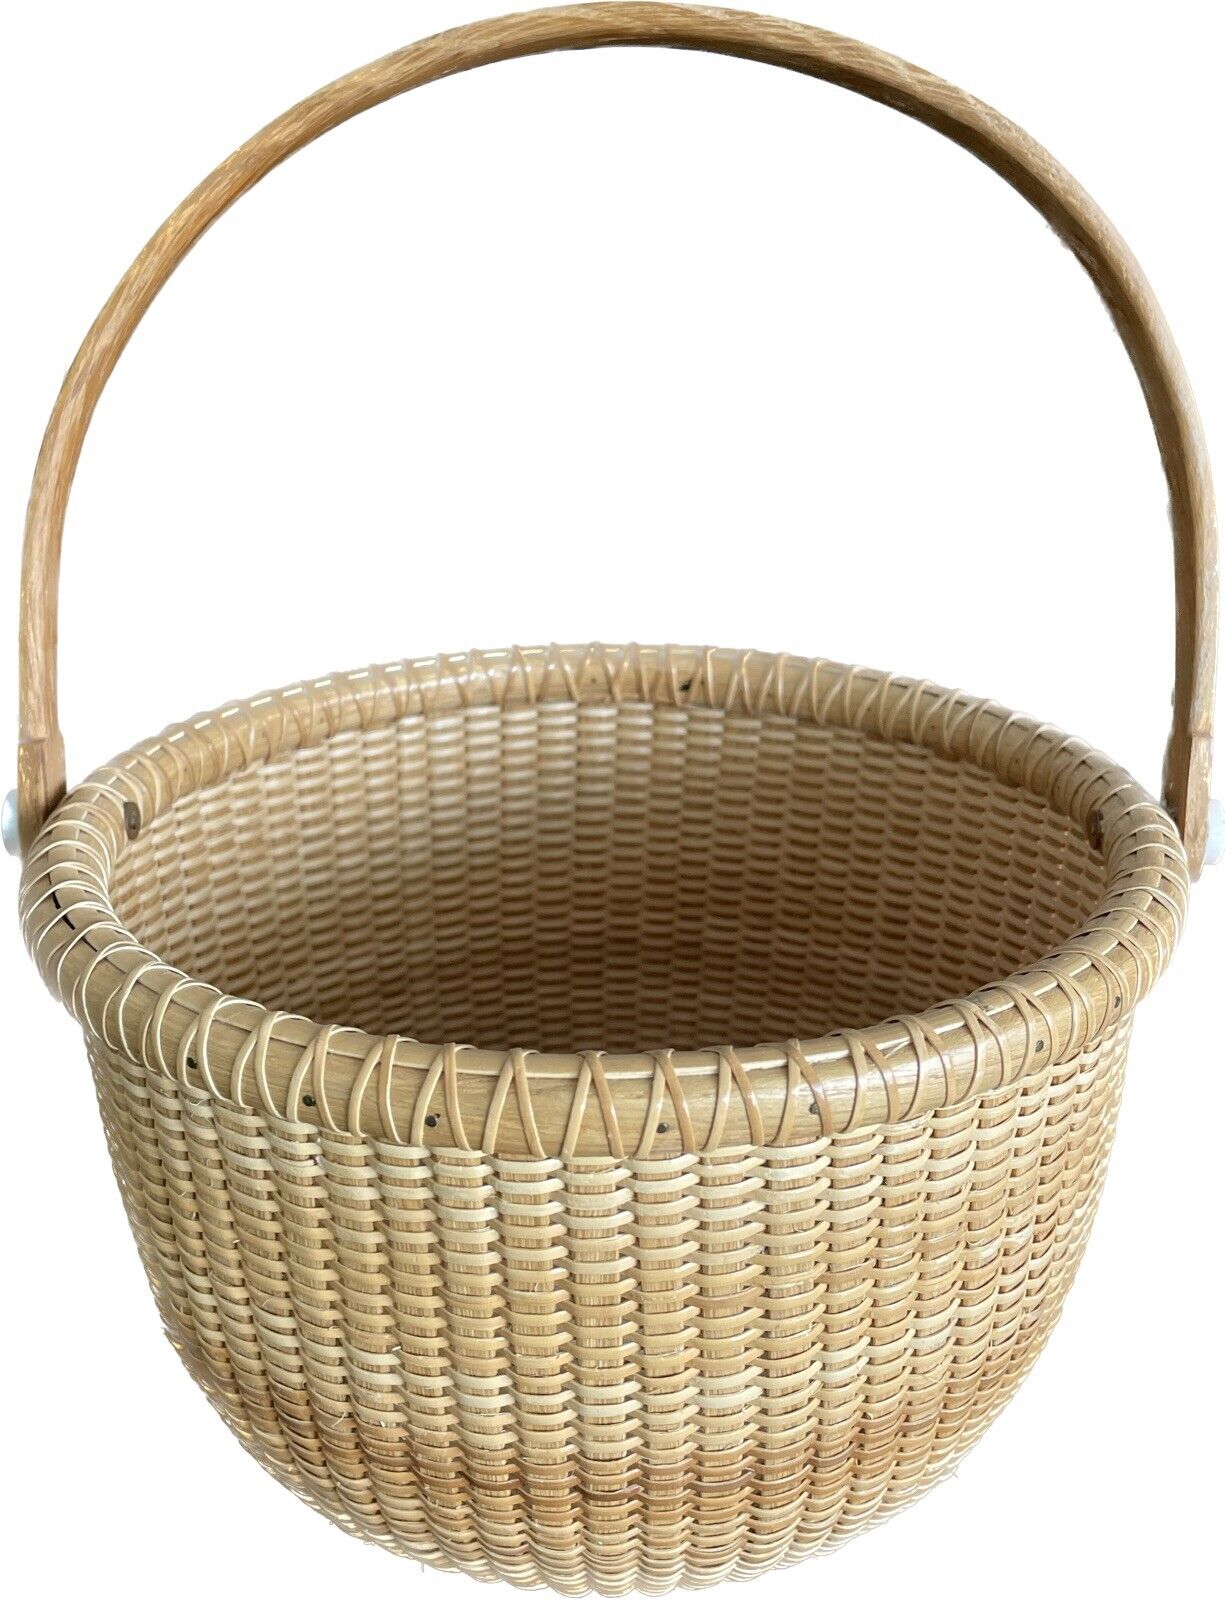 Authentic Anderson Nantucket Open Lightship Basket W/RARE PALM TREE Ecoivory  8”